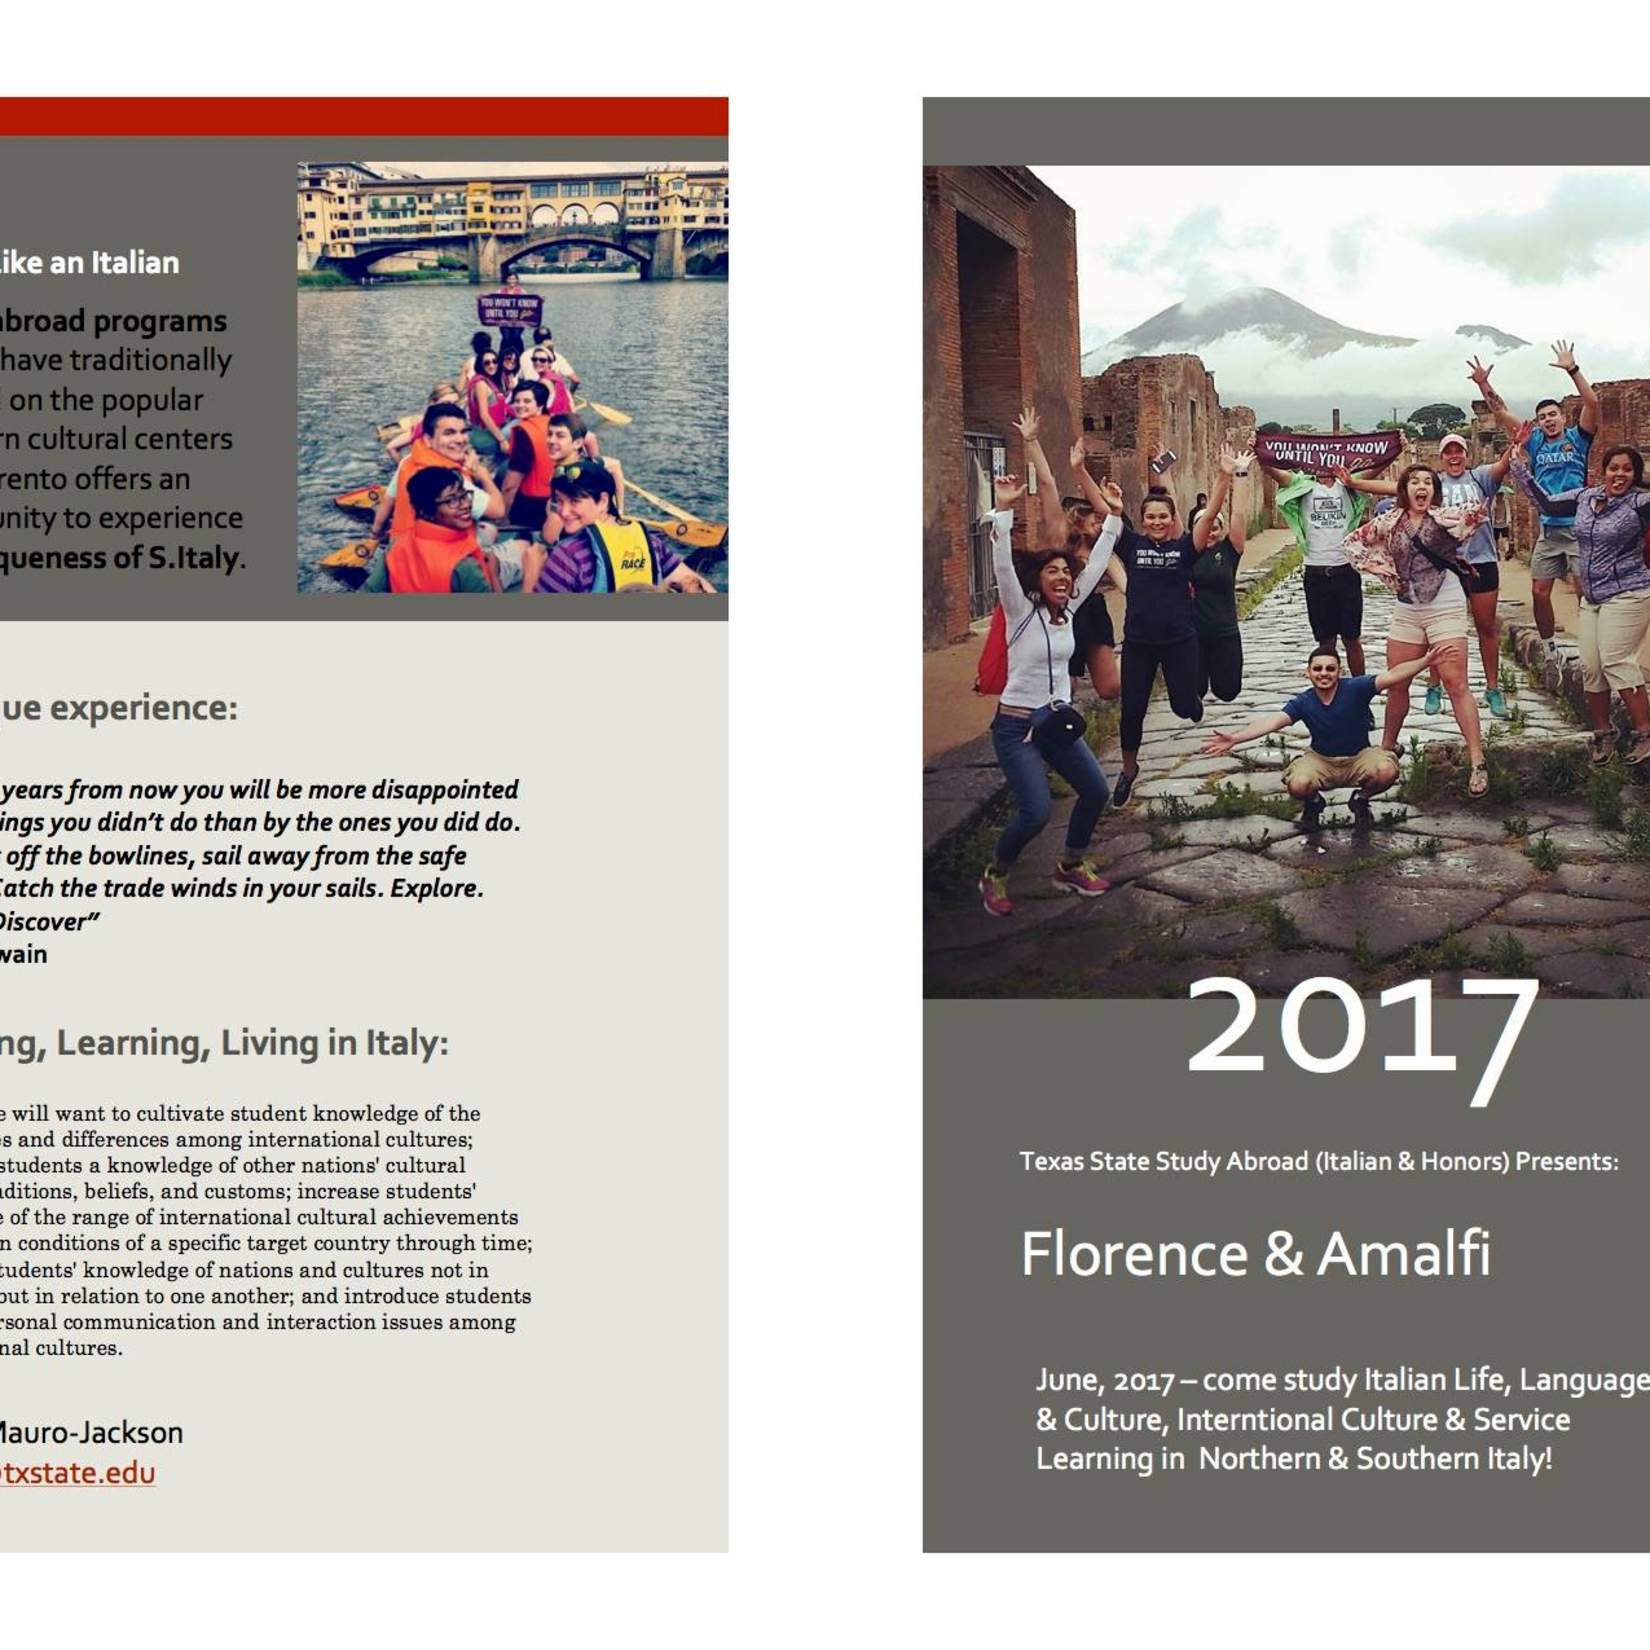 Study Abroad 2017 flyer